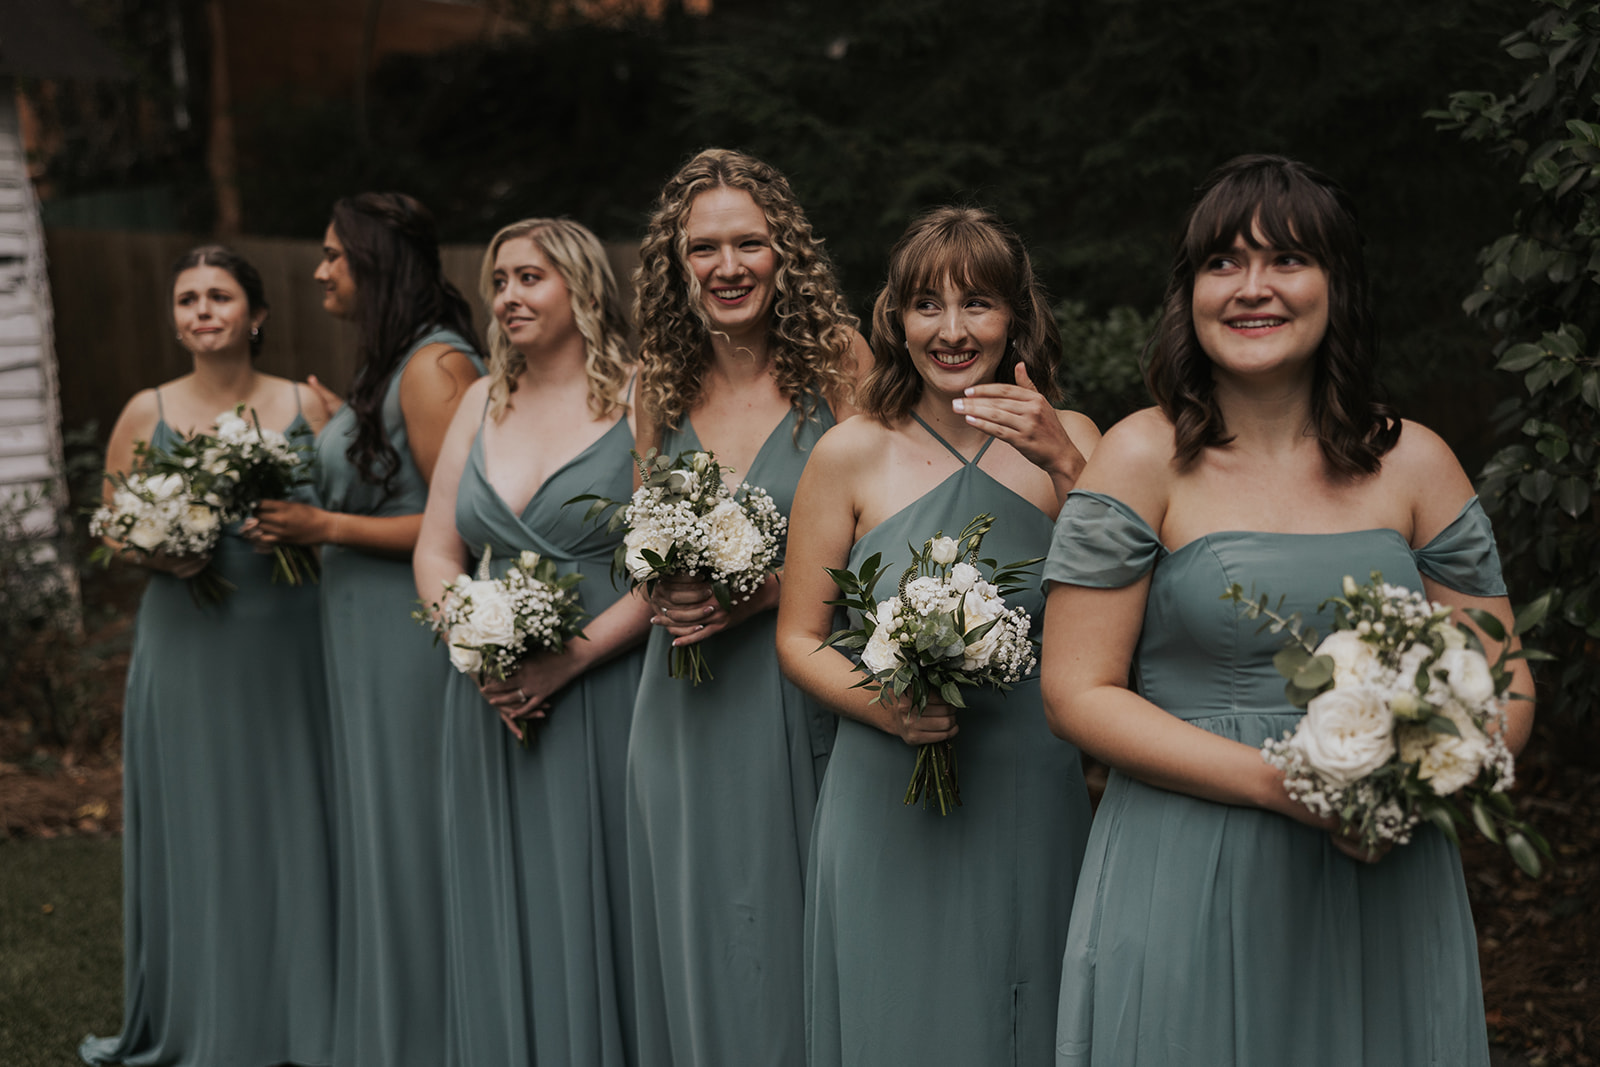 Bridemaids pose together at the alter before the dreamy Georgia wedding ceremony